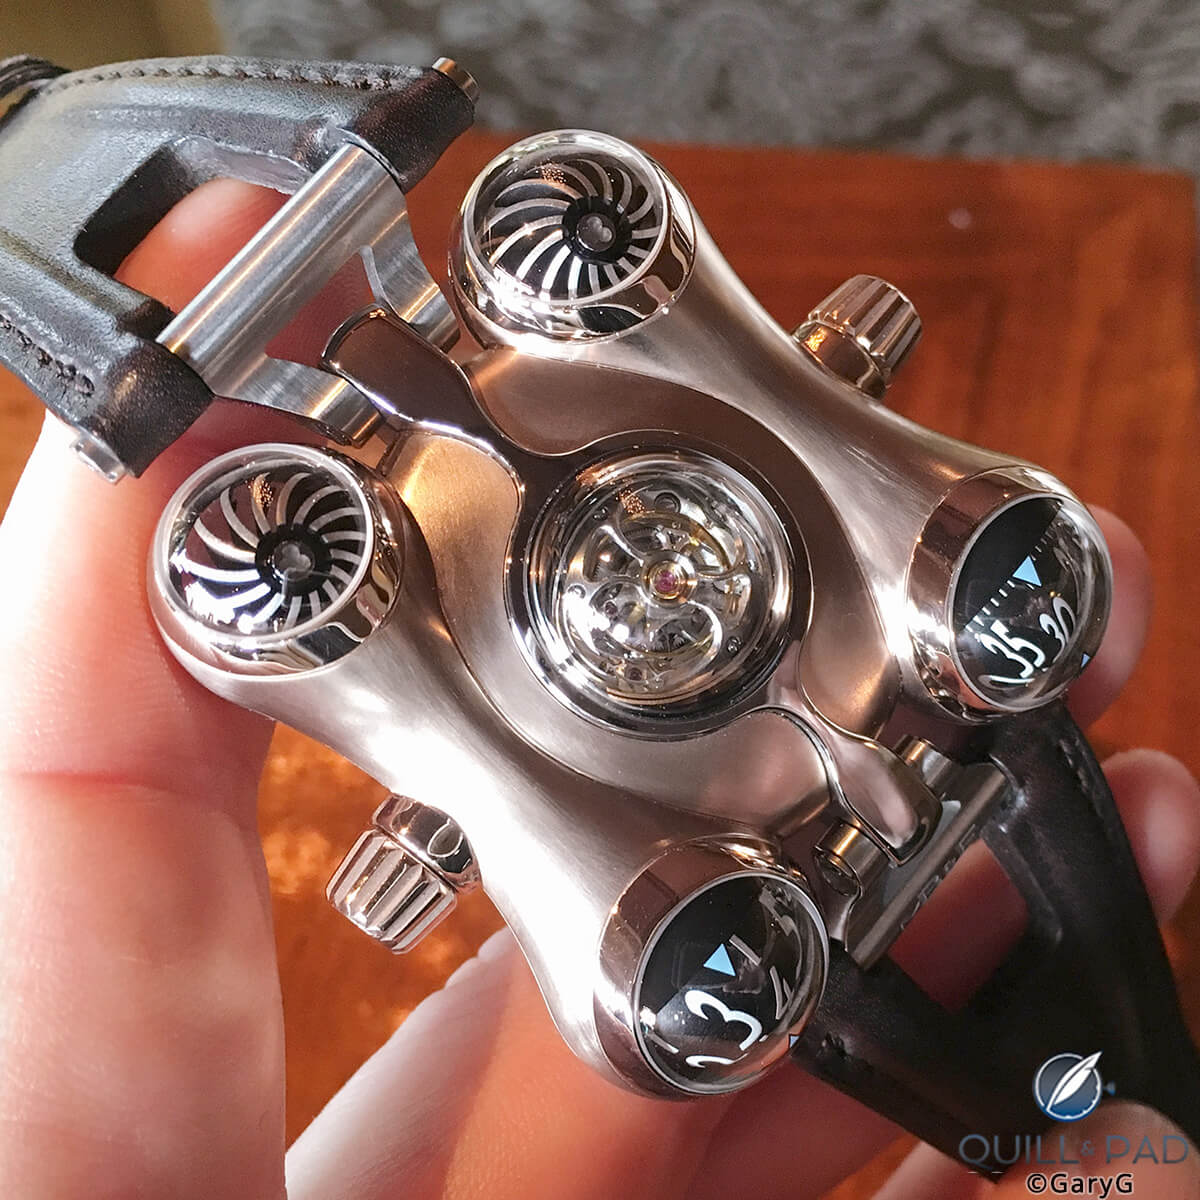 Case in point: HM6 Space Pirate from Max Büsser and Friends, MB&F